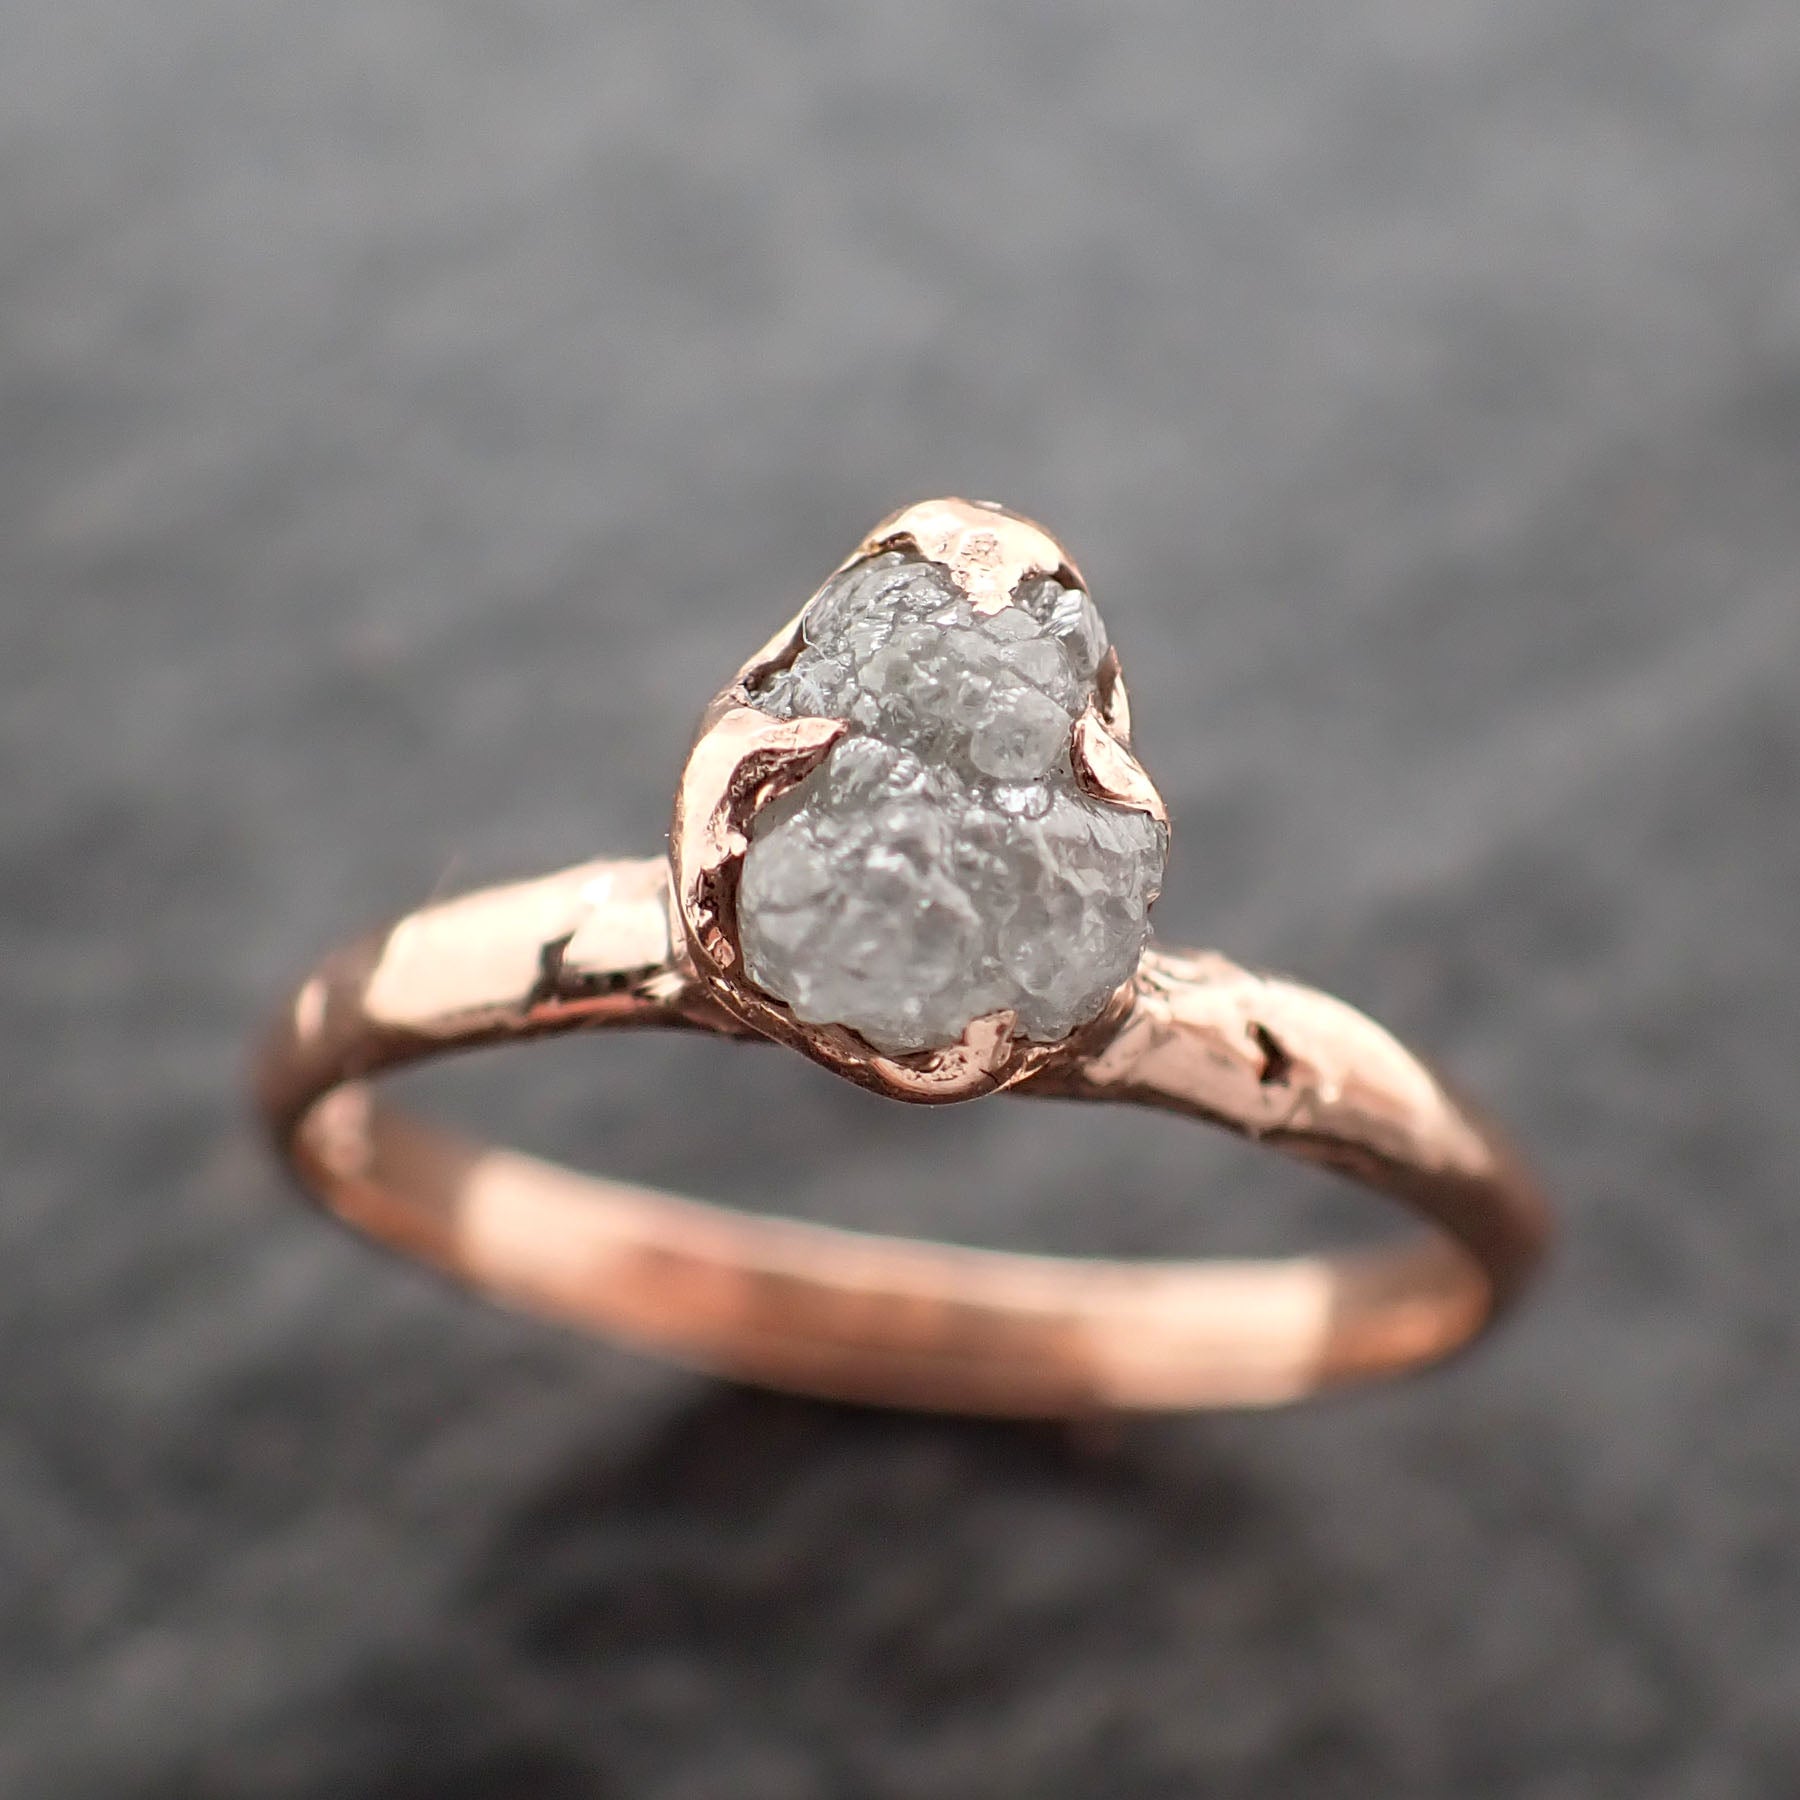 Raw Diamond Engagement Ring Rough Uncut Diamond Solitaire Recycled 14k Rose gold Conflict Free Diamond Wedding Promise 2744